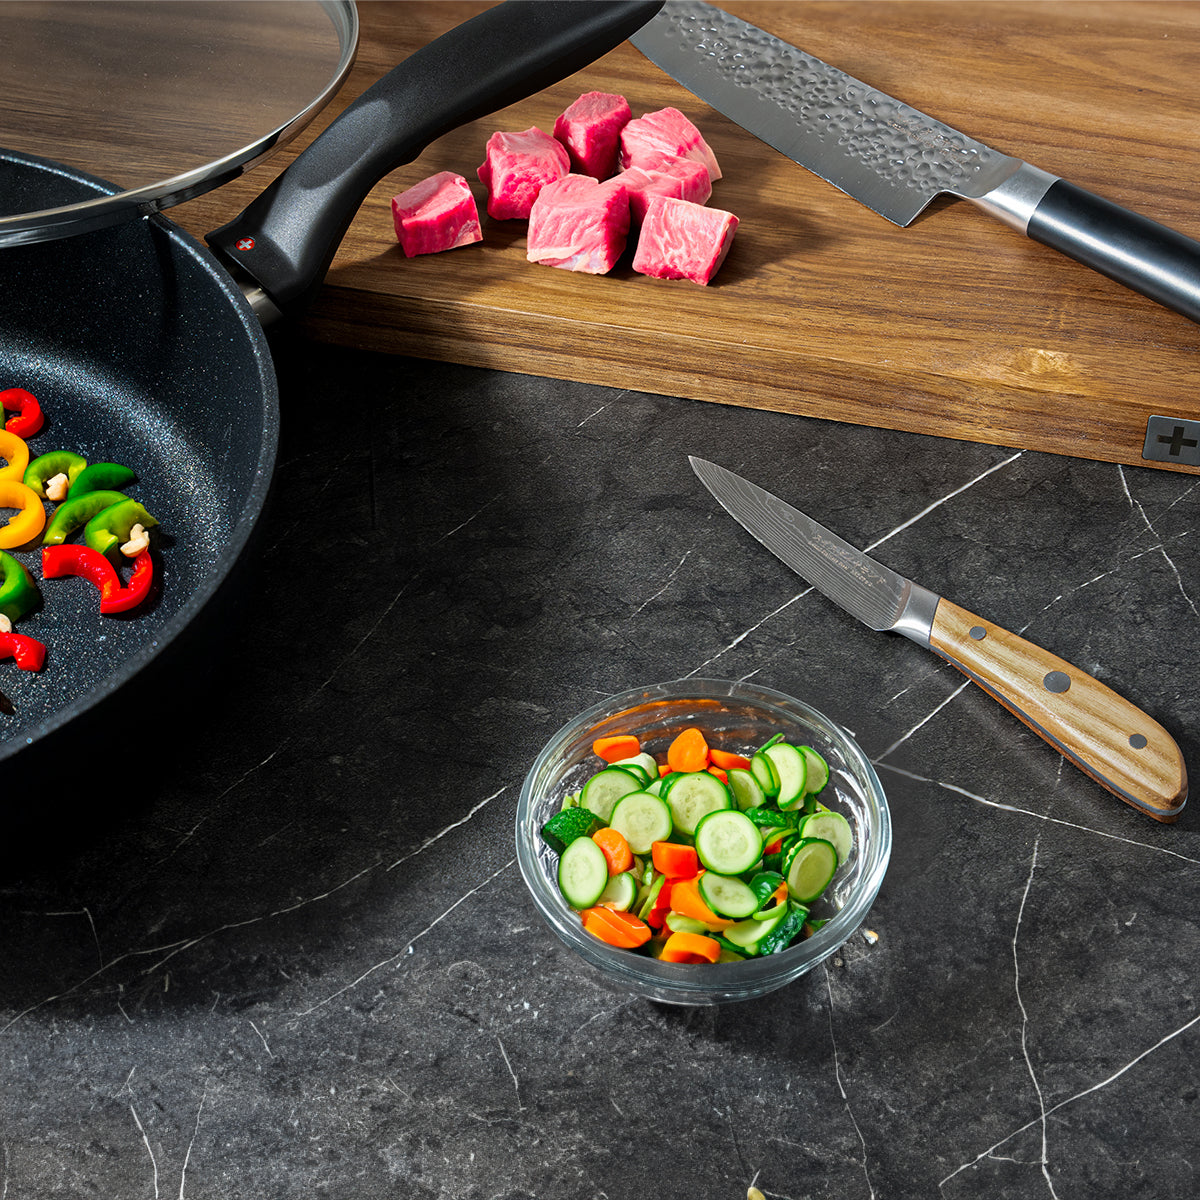 Knives on cutting board with chopped meat and fry pan with veggies in a bowl